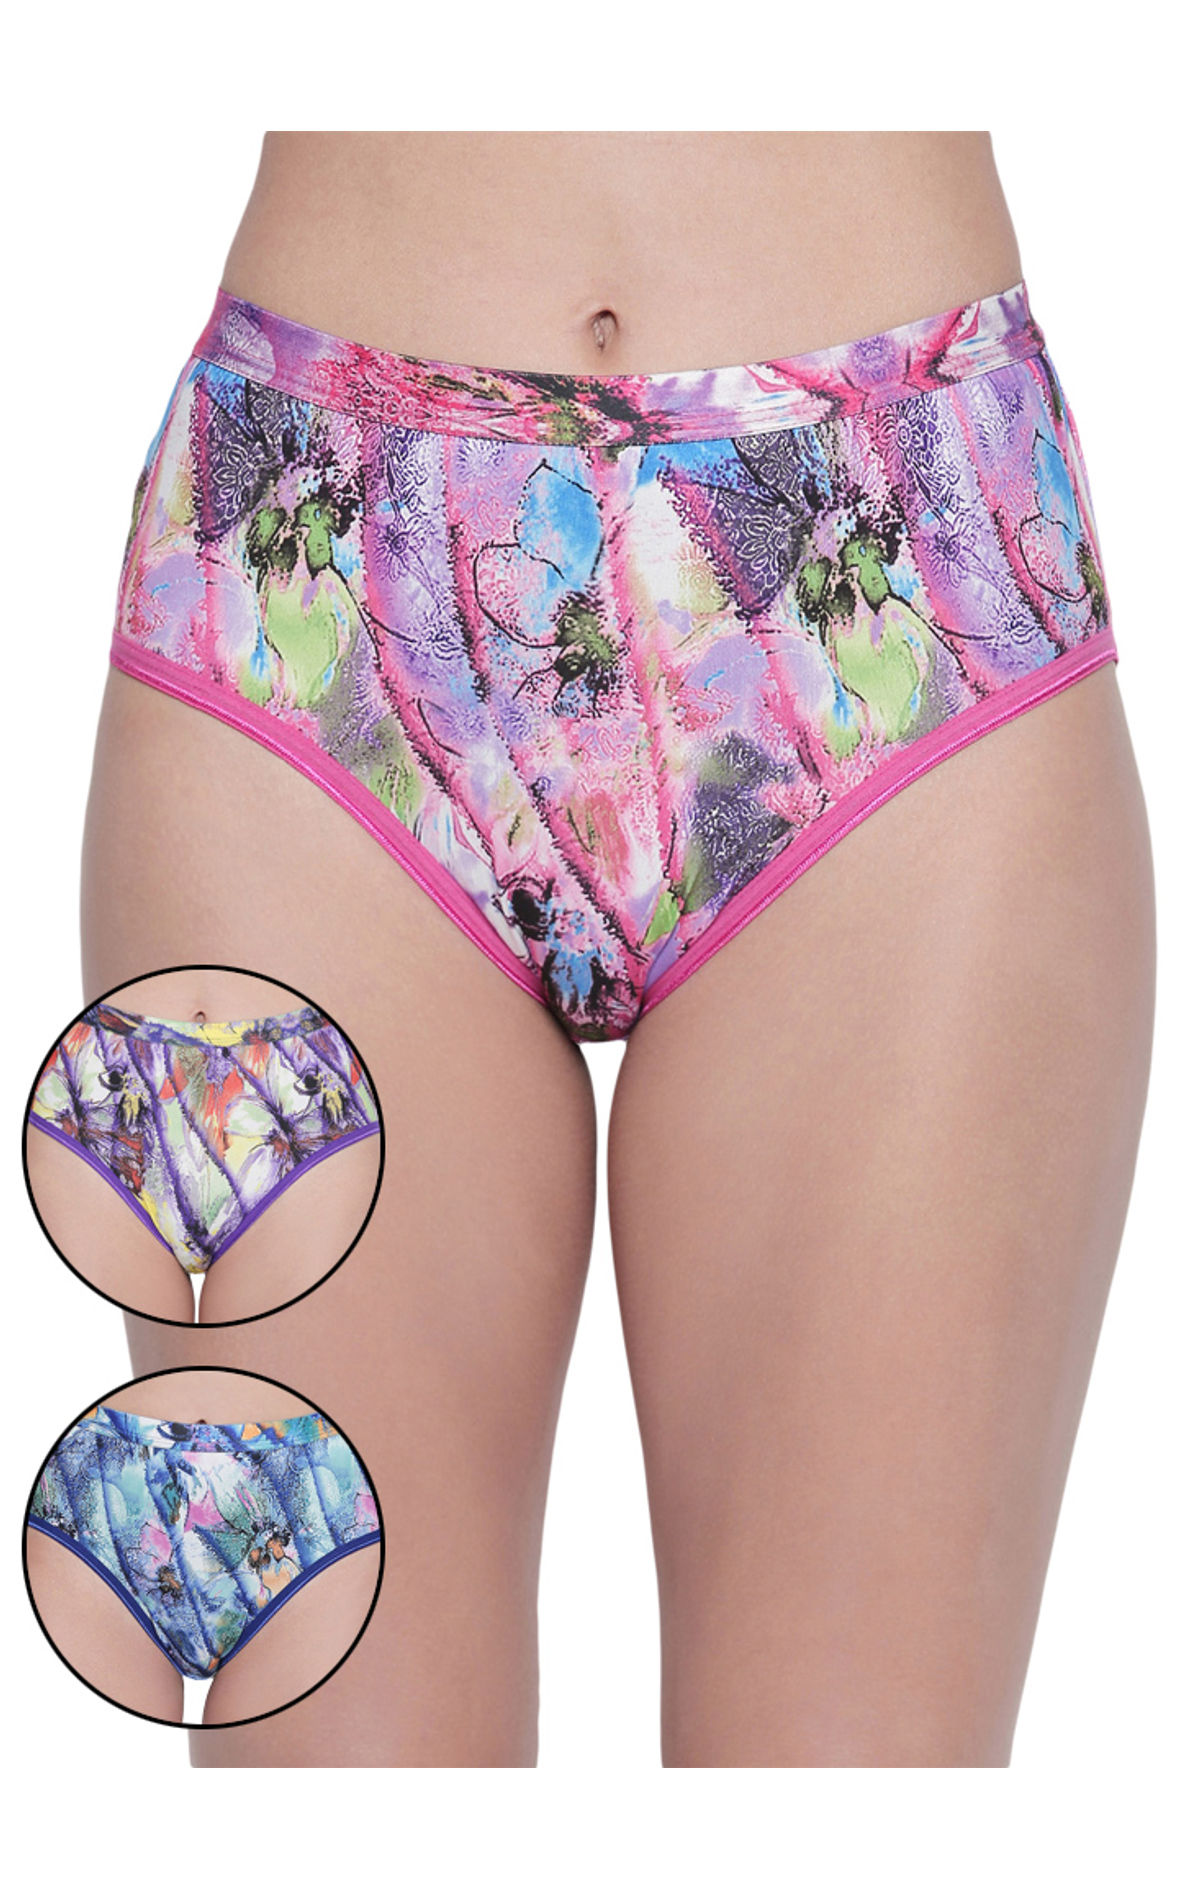 Pack Of 3 High-cut Bikini Style Cotton Printed Briefs In Assorted